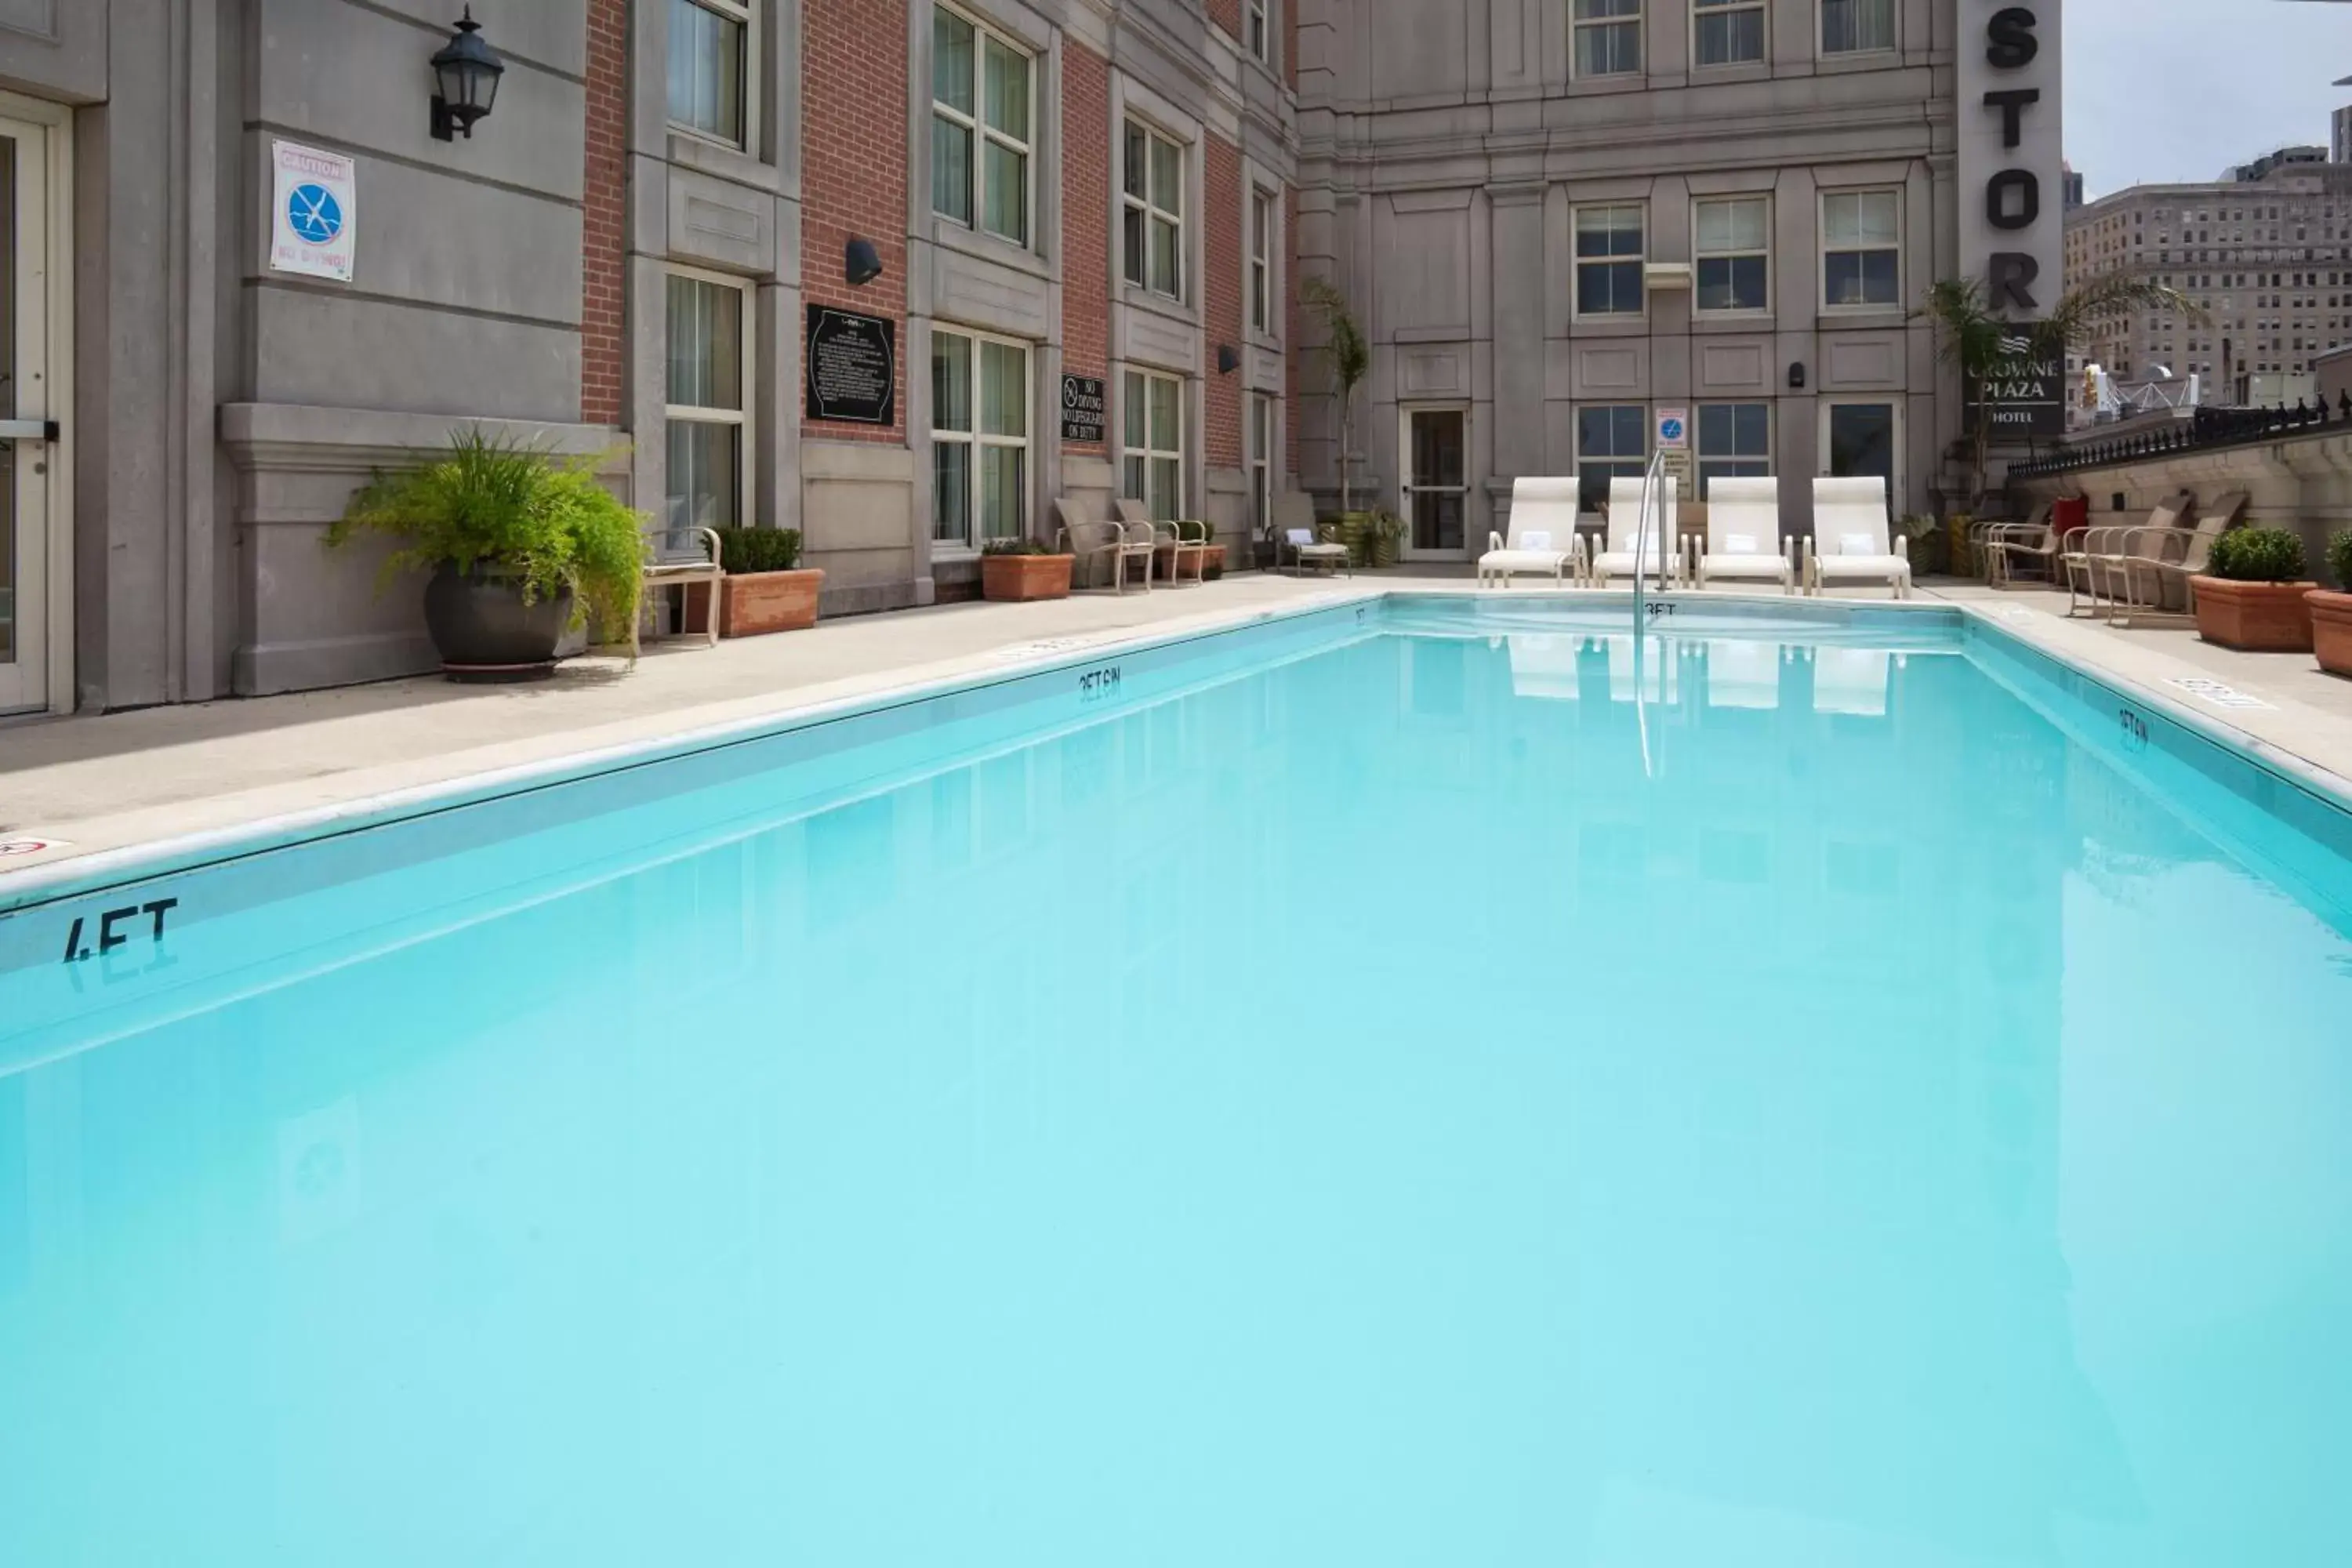 Swimming Pool in Astor Crowne Plaza New Orleans French Quarter, Corner of Bourbon and Canal